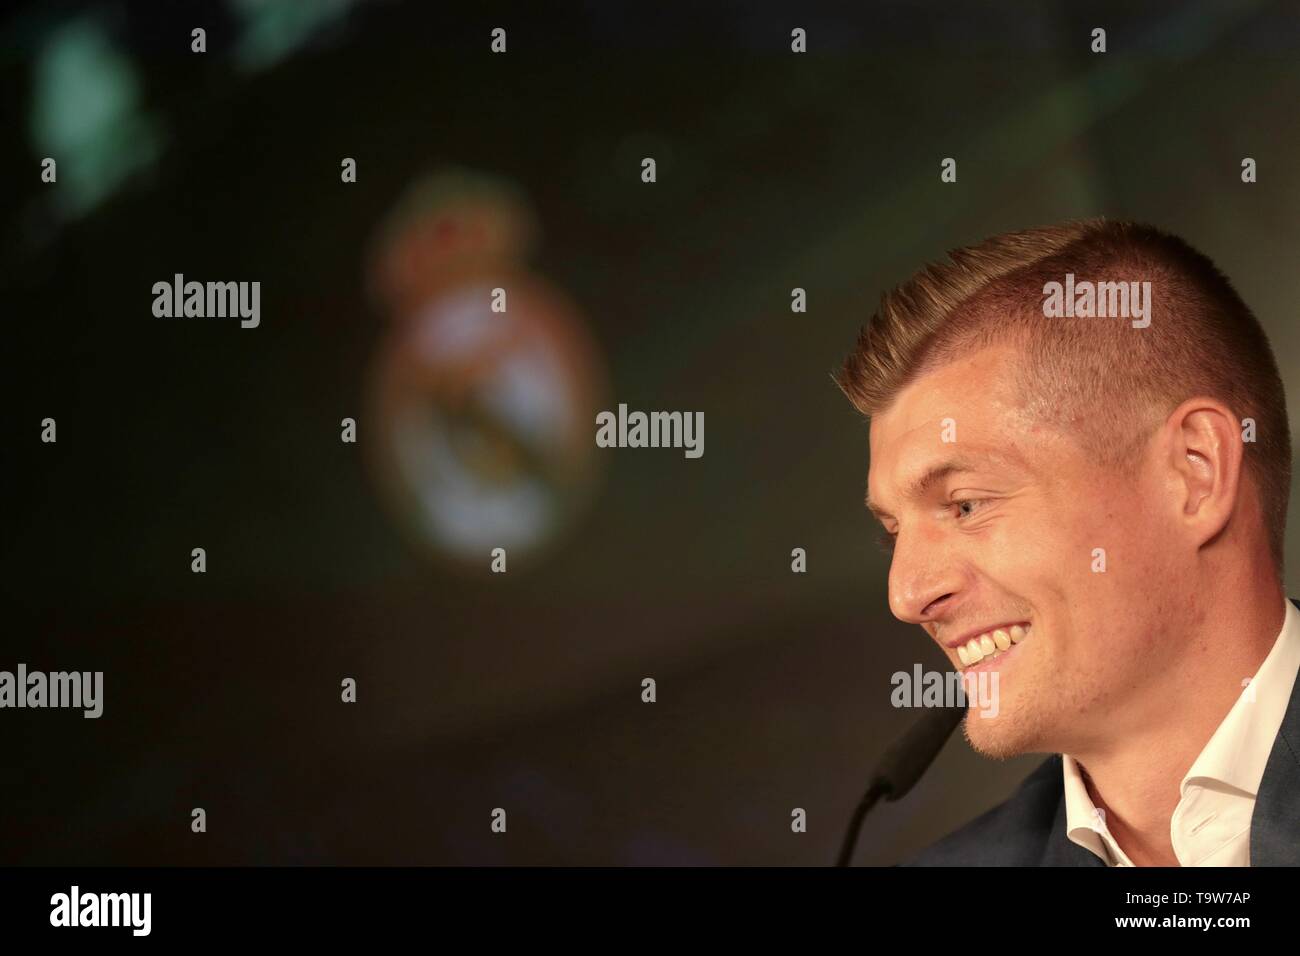 Madrid, Spain. 20th May, 2019. Madrid, Spain; 20/05/2019. Ress conference Real Madrid CF and Toni Kroos have agreed to extend the player's contract, which remains linked to the club until June 30, 2023. And Emilio Butragueño. Santiago Bernabeu stadium. Credit: Juan Carlos Rojas/Picture Alliance | usage worldwide/dpa/Alamy Live News Stock Photo